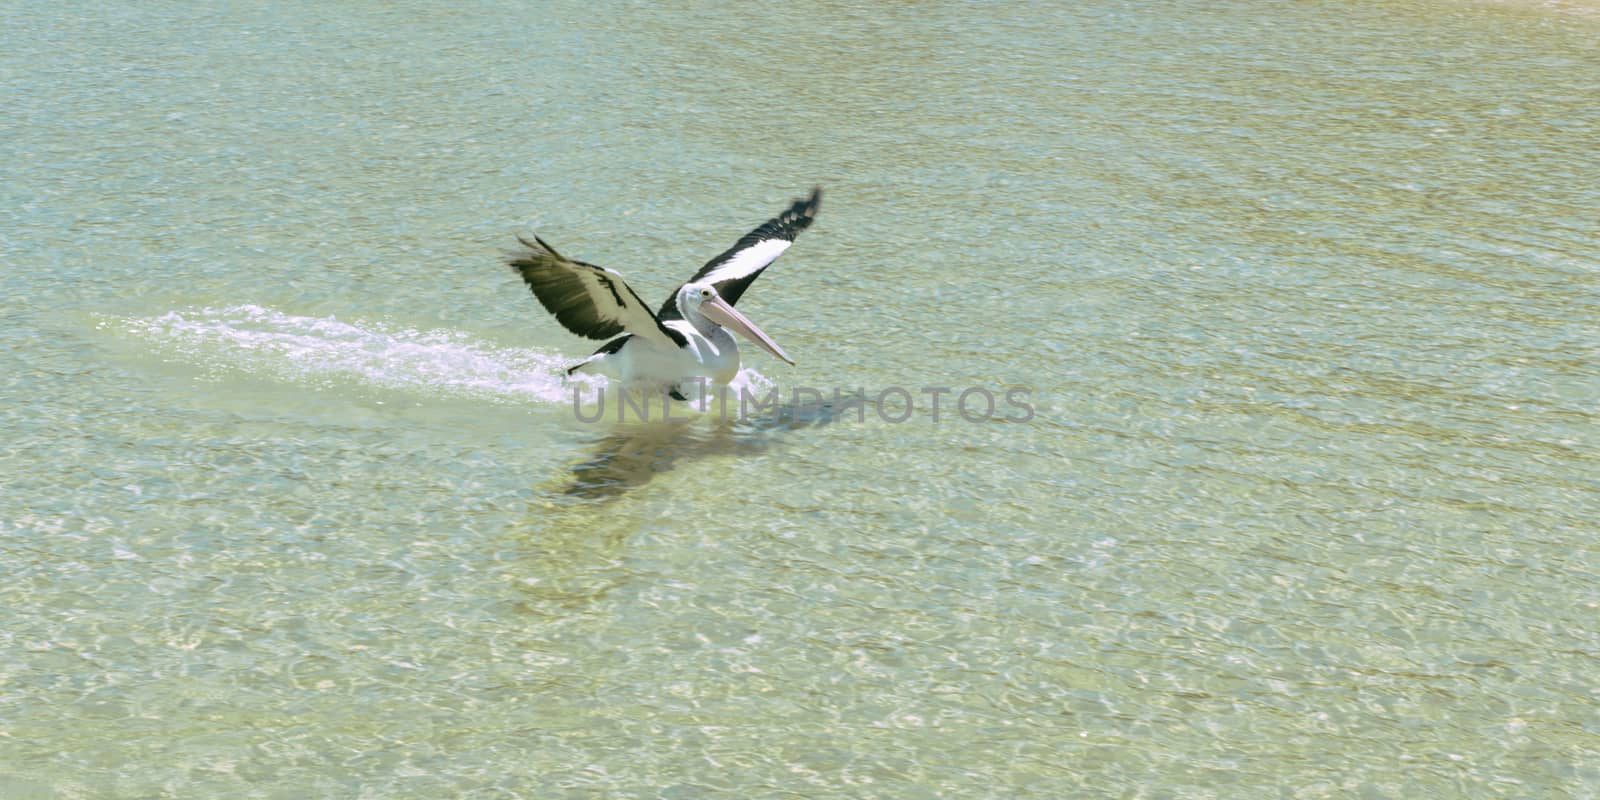 Pelican swimming in the water by artistrobd